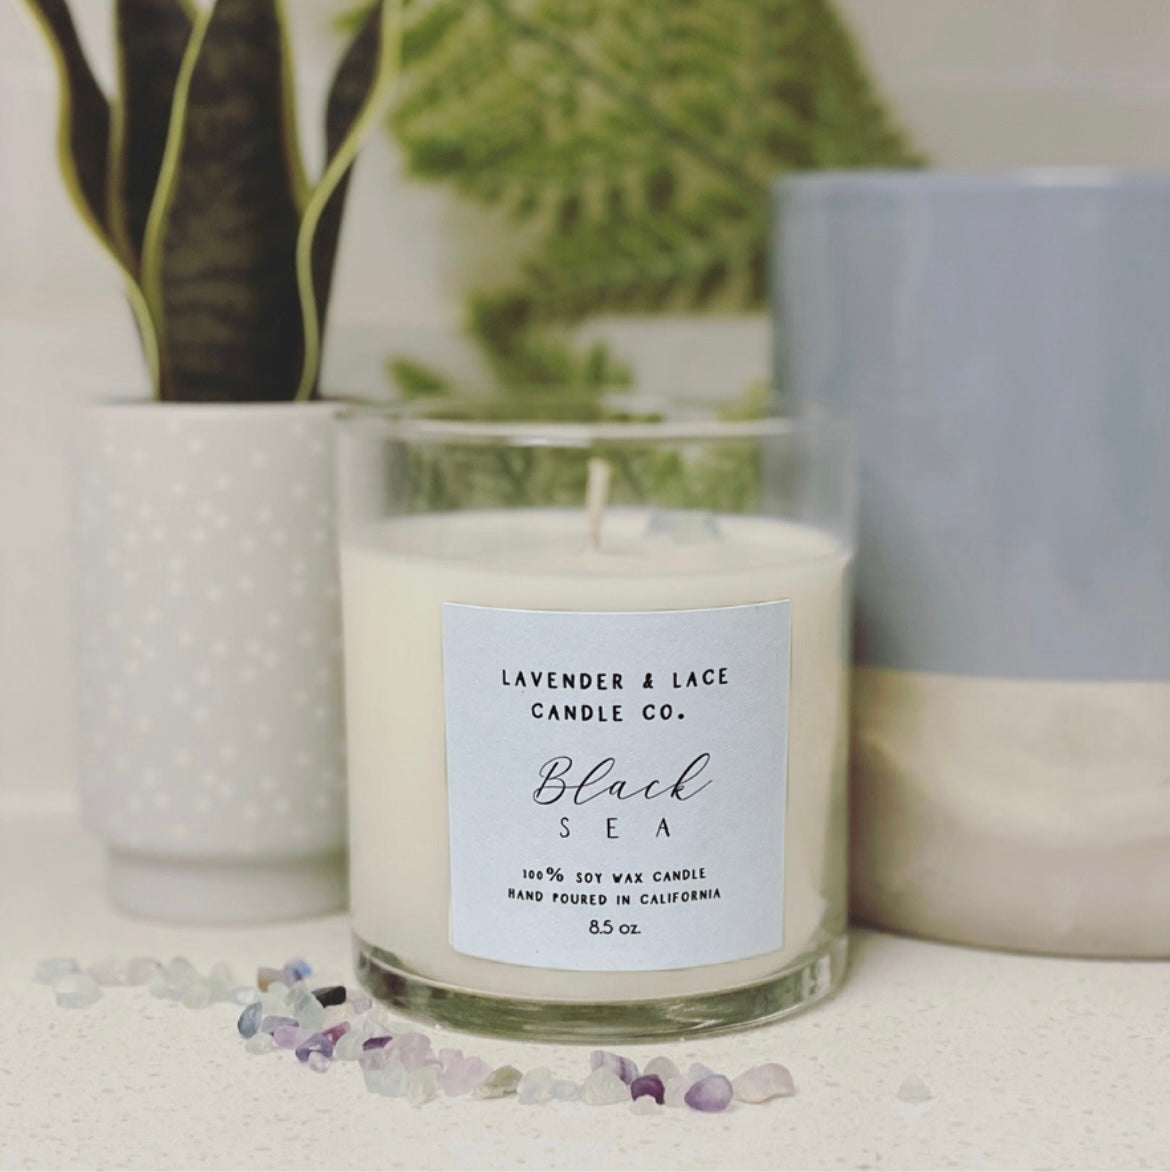 Black Sea Candle - Lavender and Lace Candles